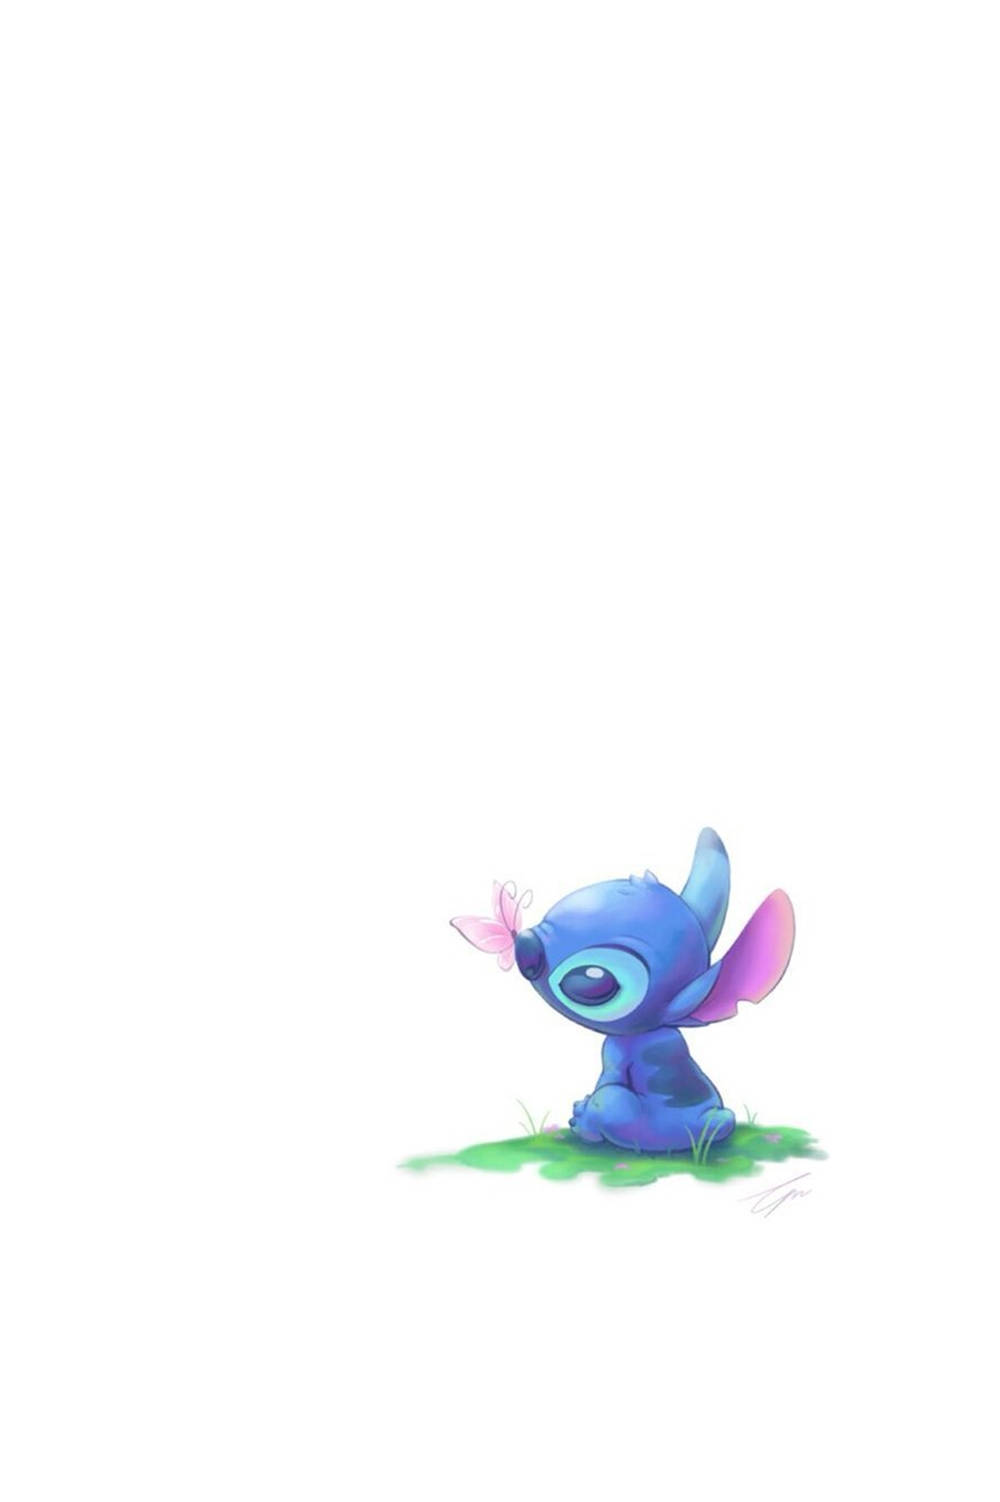 Cute Stitch With Butterfly Iphone Wallpaper